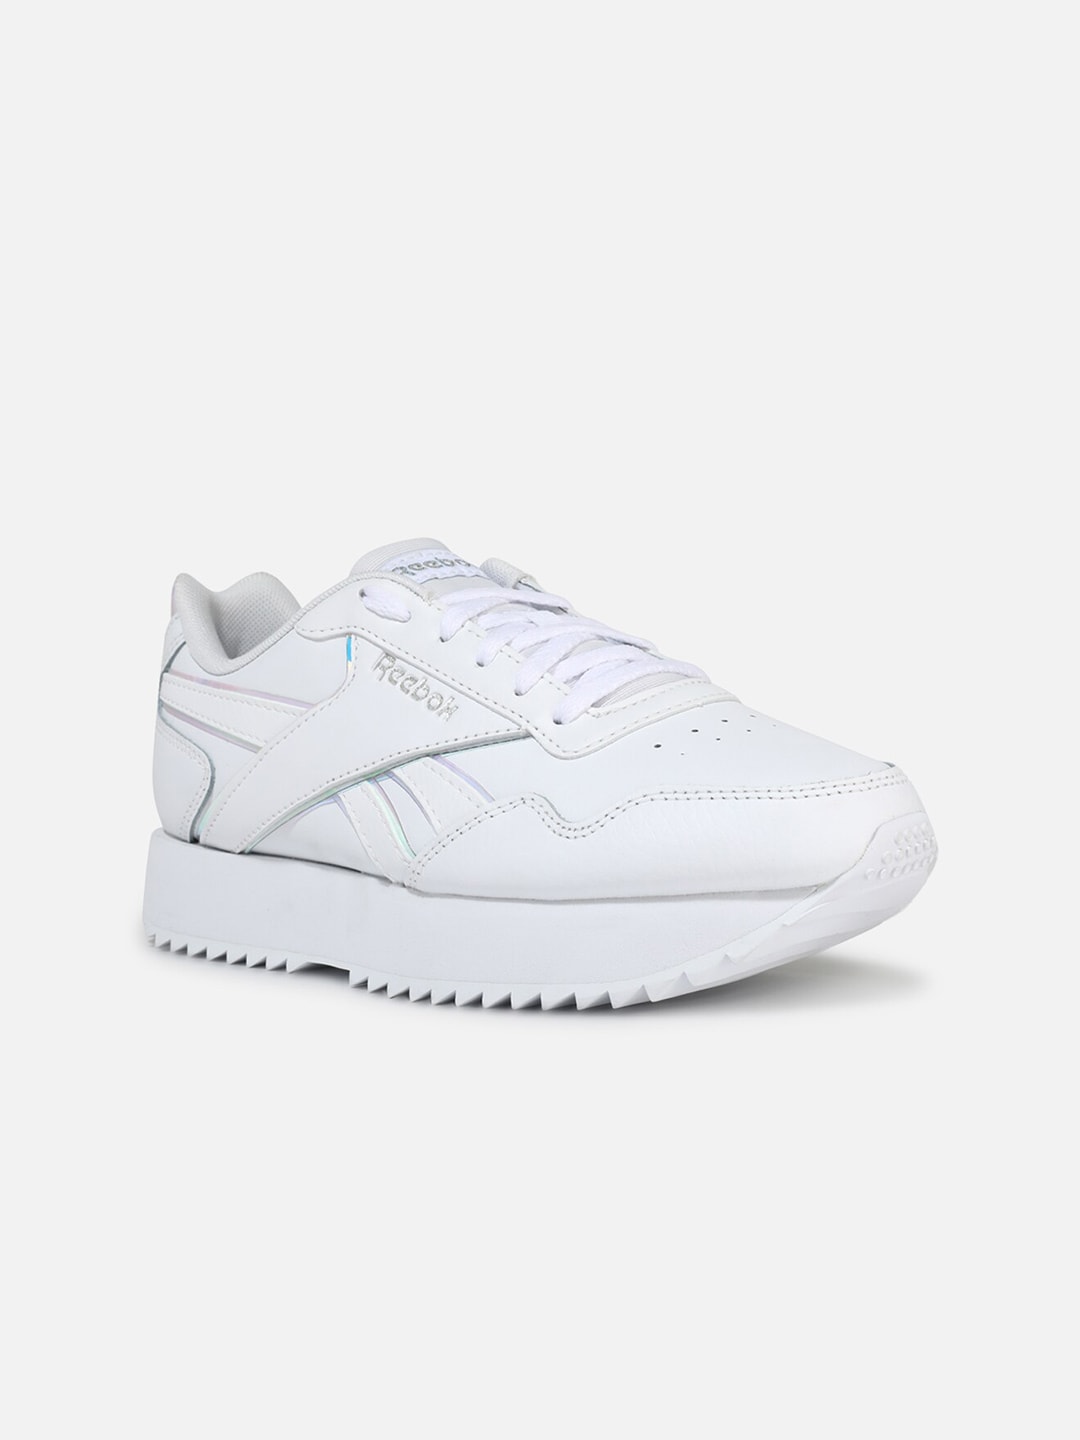 Reebok Women Classics Core Royal Glide Ripple Doub Leather Shoes Leather Price in India